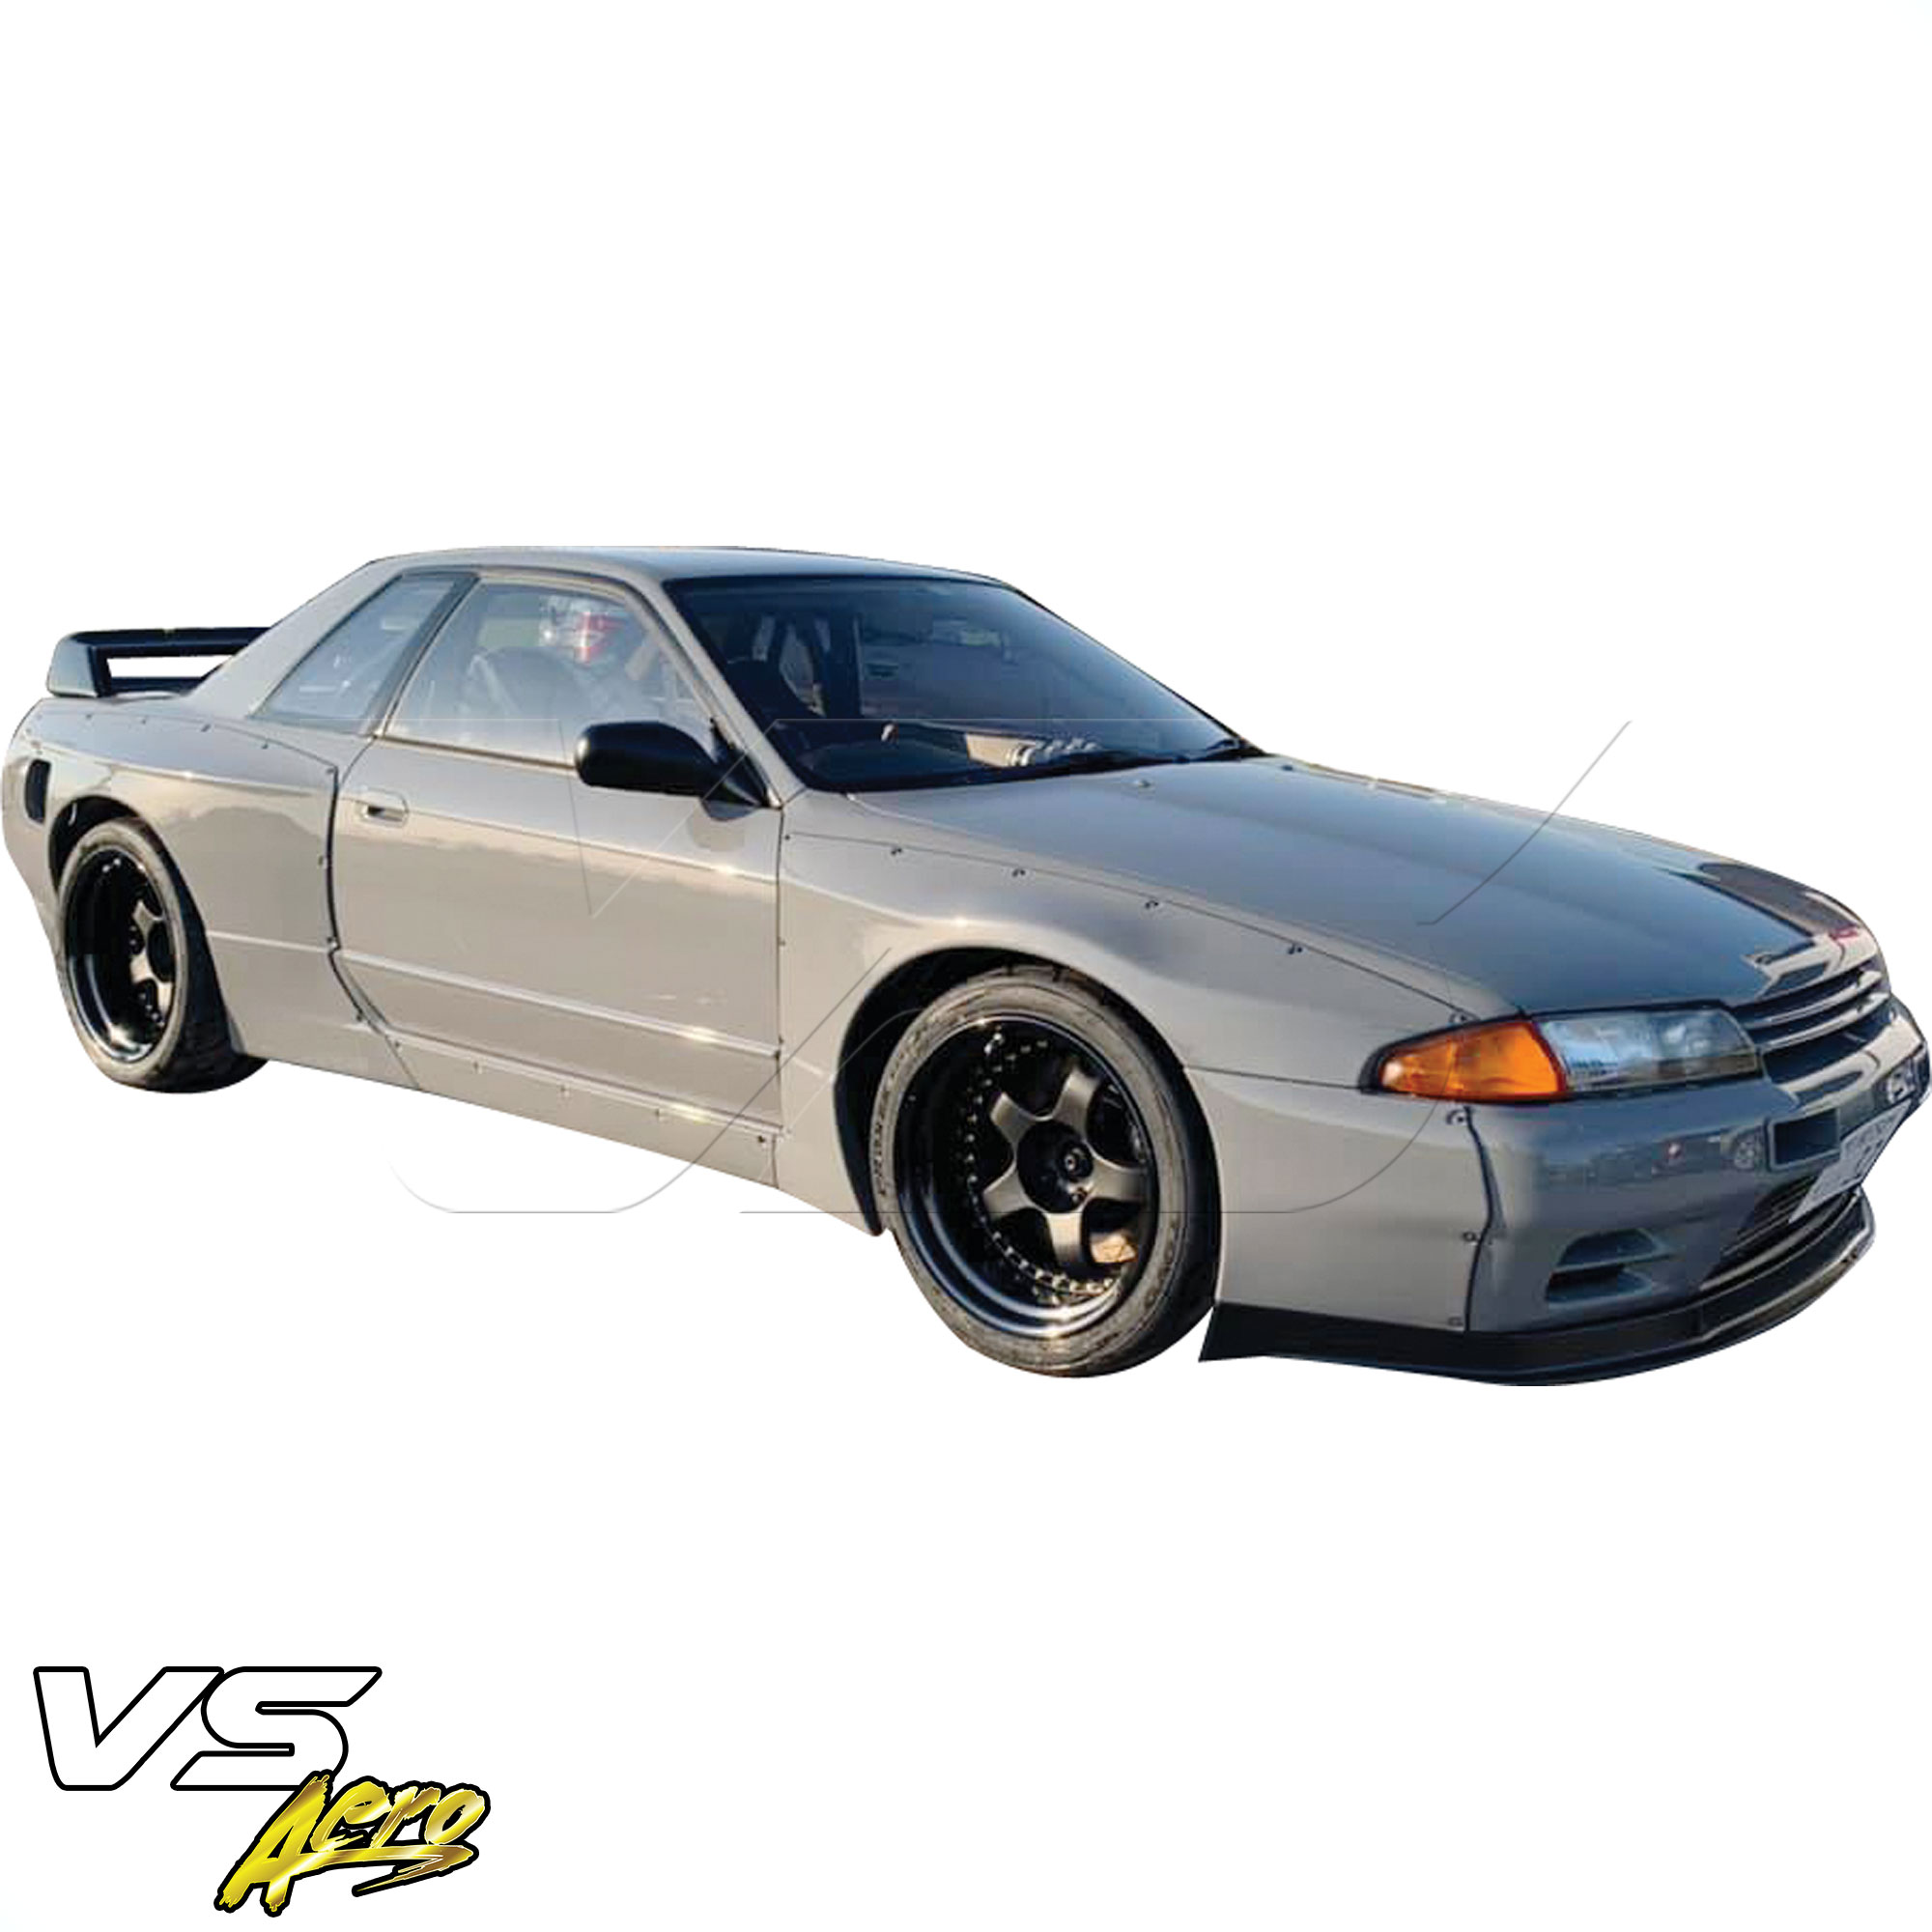 VSaero FRP TKYO Wide Body 40mm Fender Flares (front) 4pc > Nissan Skyline R32 1990-1994 > 2dr Coupe - Image 18